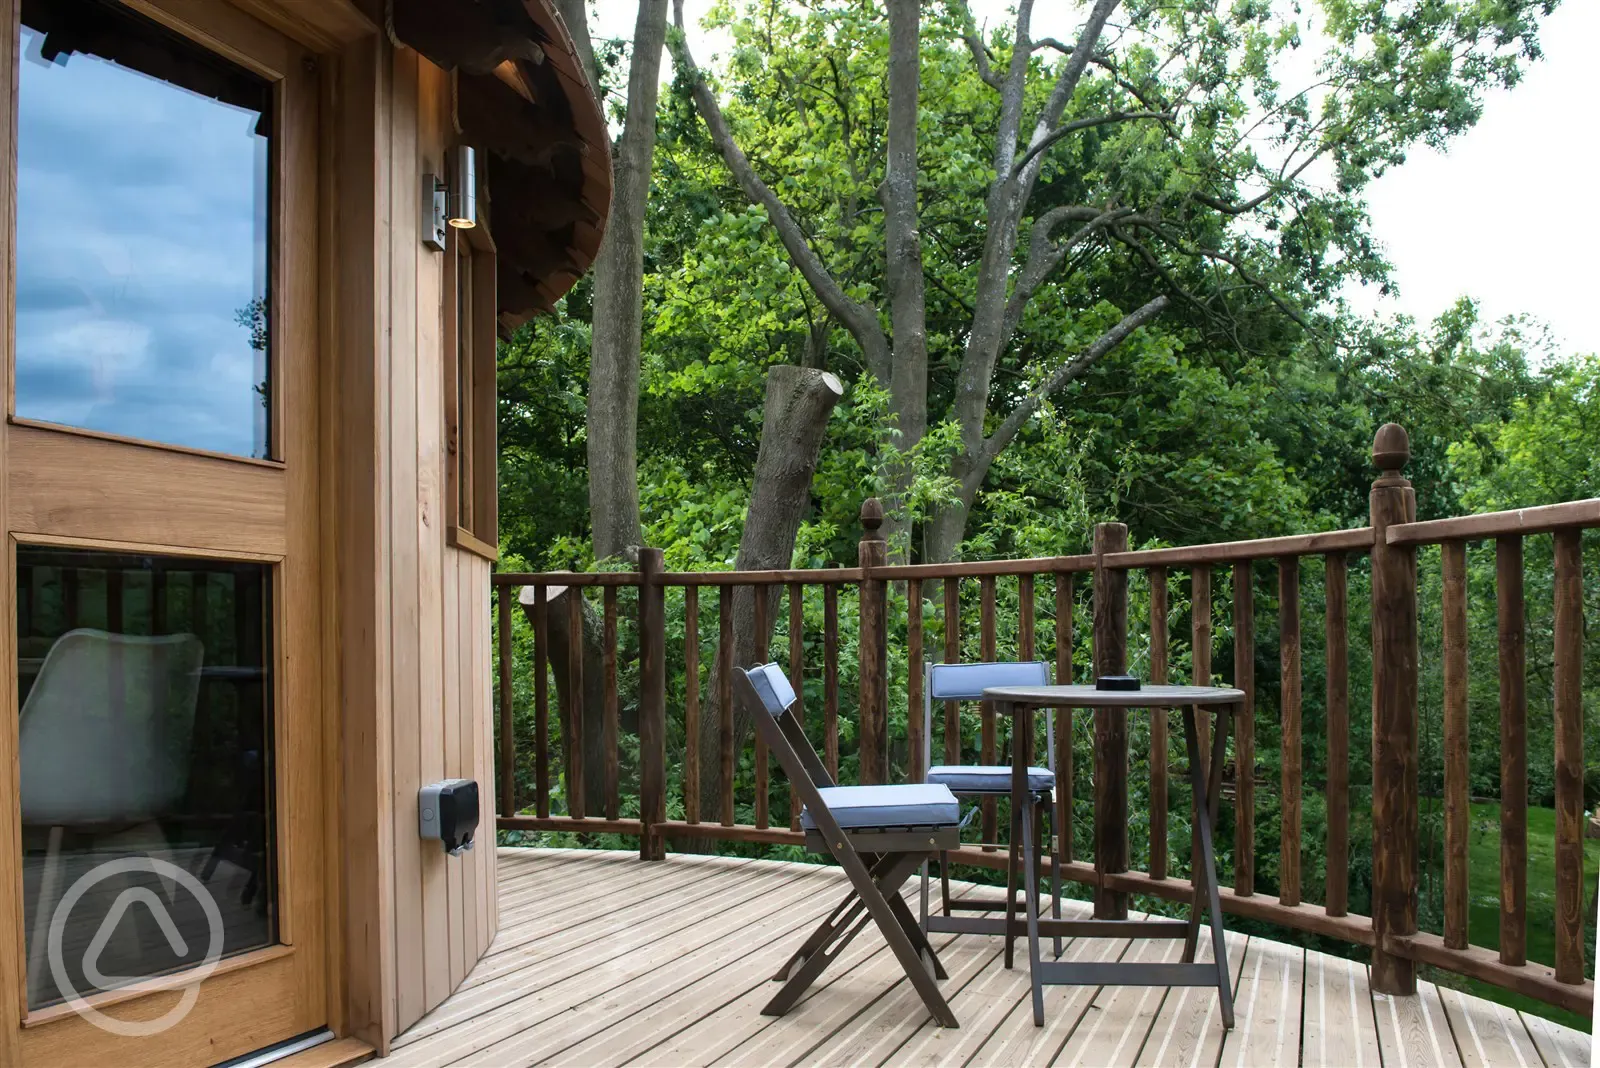 Treehouse balcony for alfresco dining or nightime stargazing. Unspoilt views up to village and church spire.